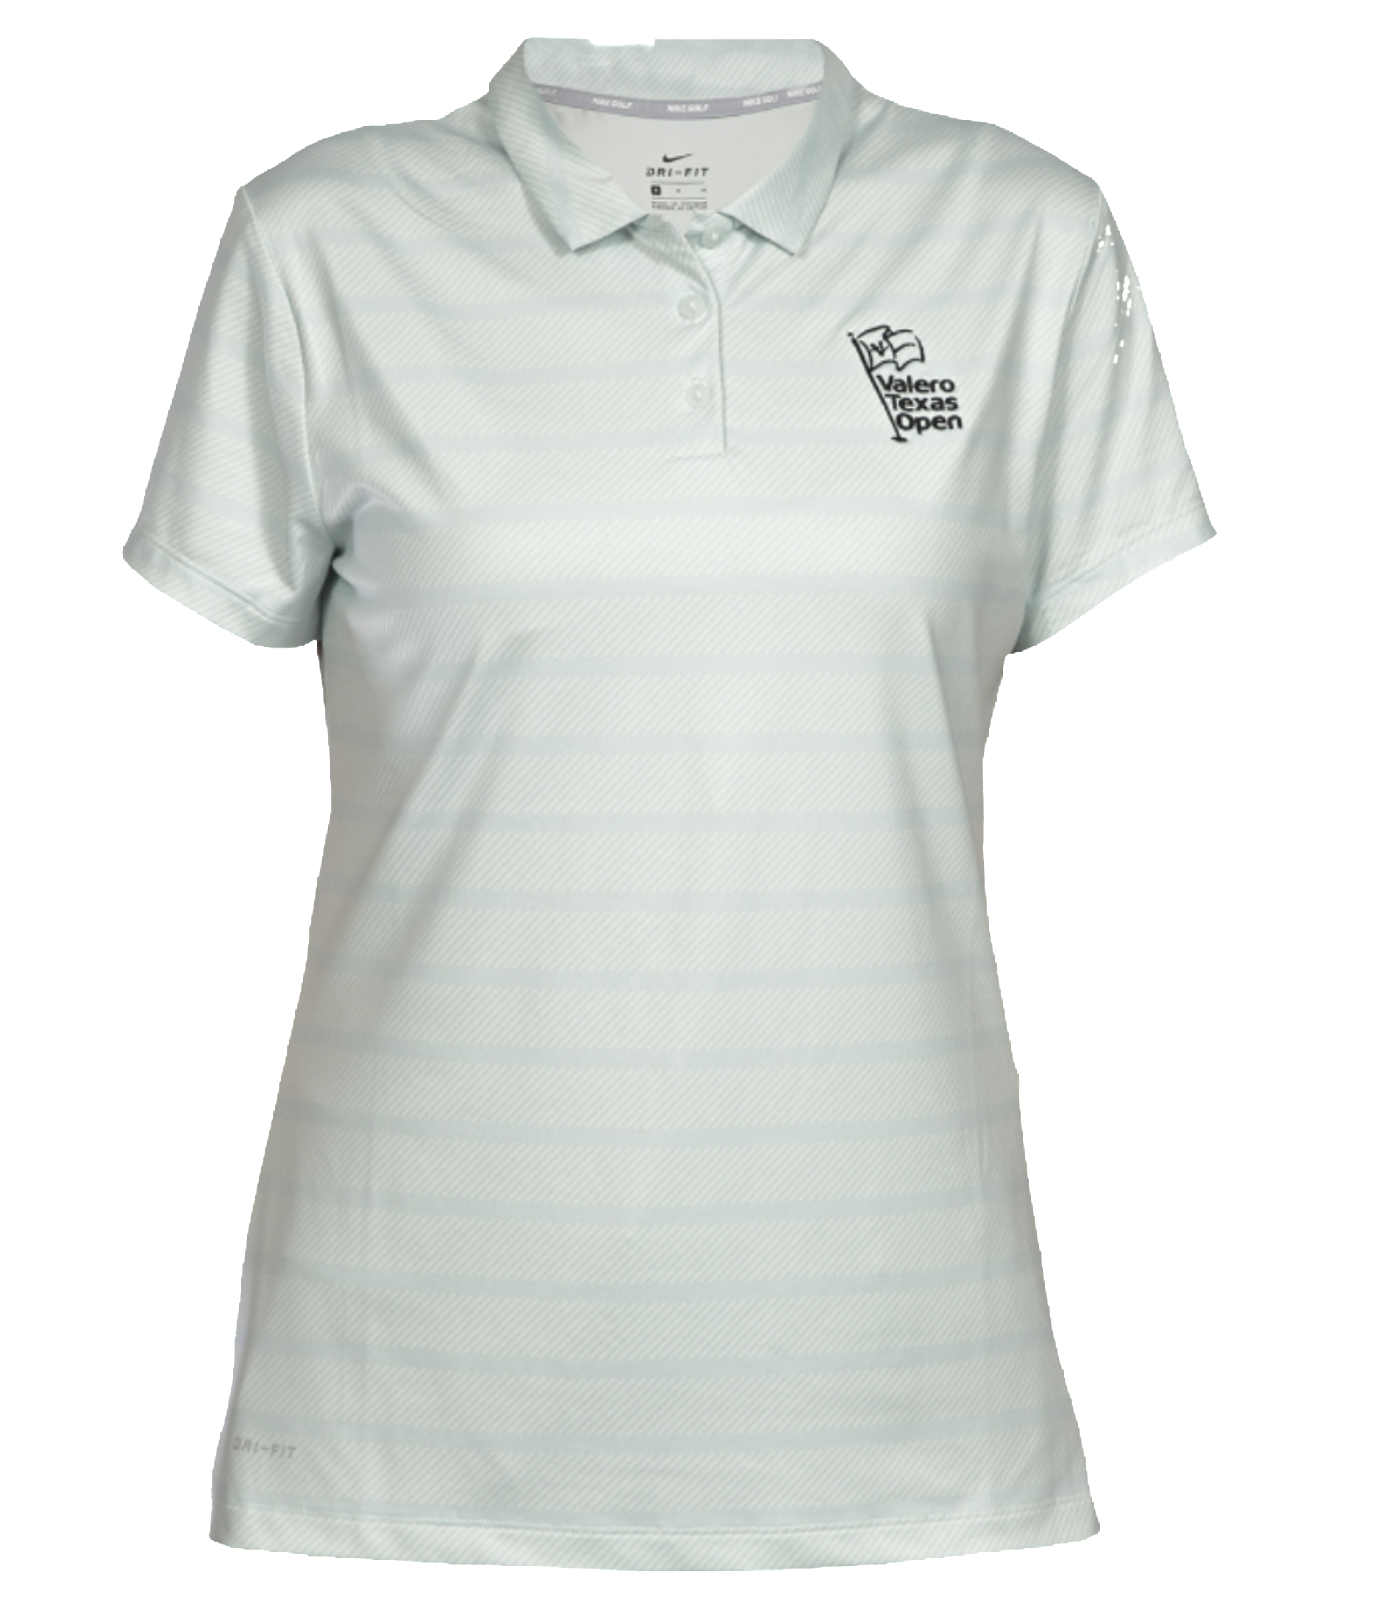 Women's Nike Dry Fit Polo